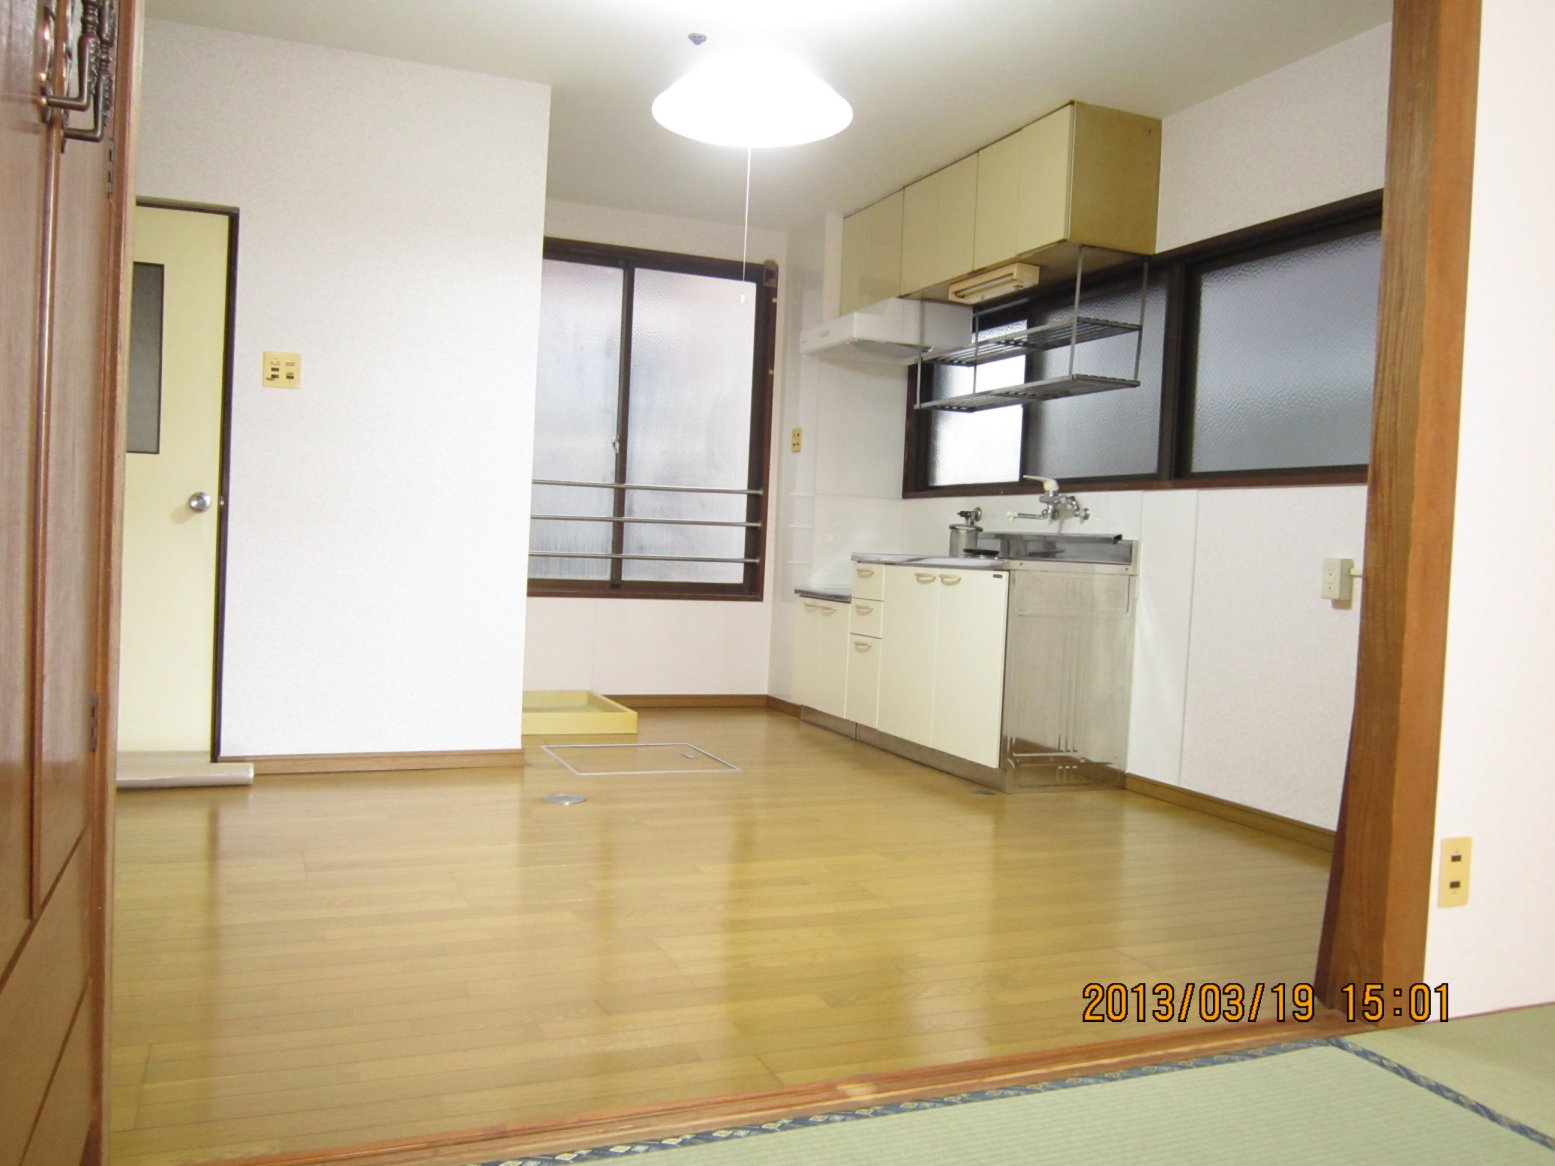 Kitchen. It is very bright and spacious.